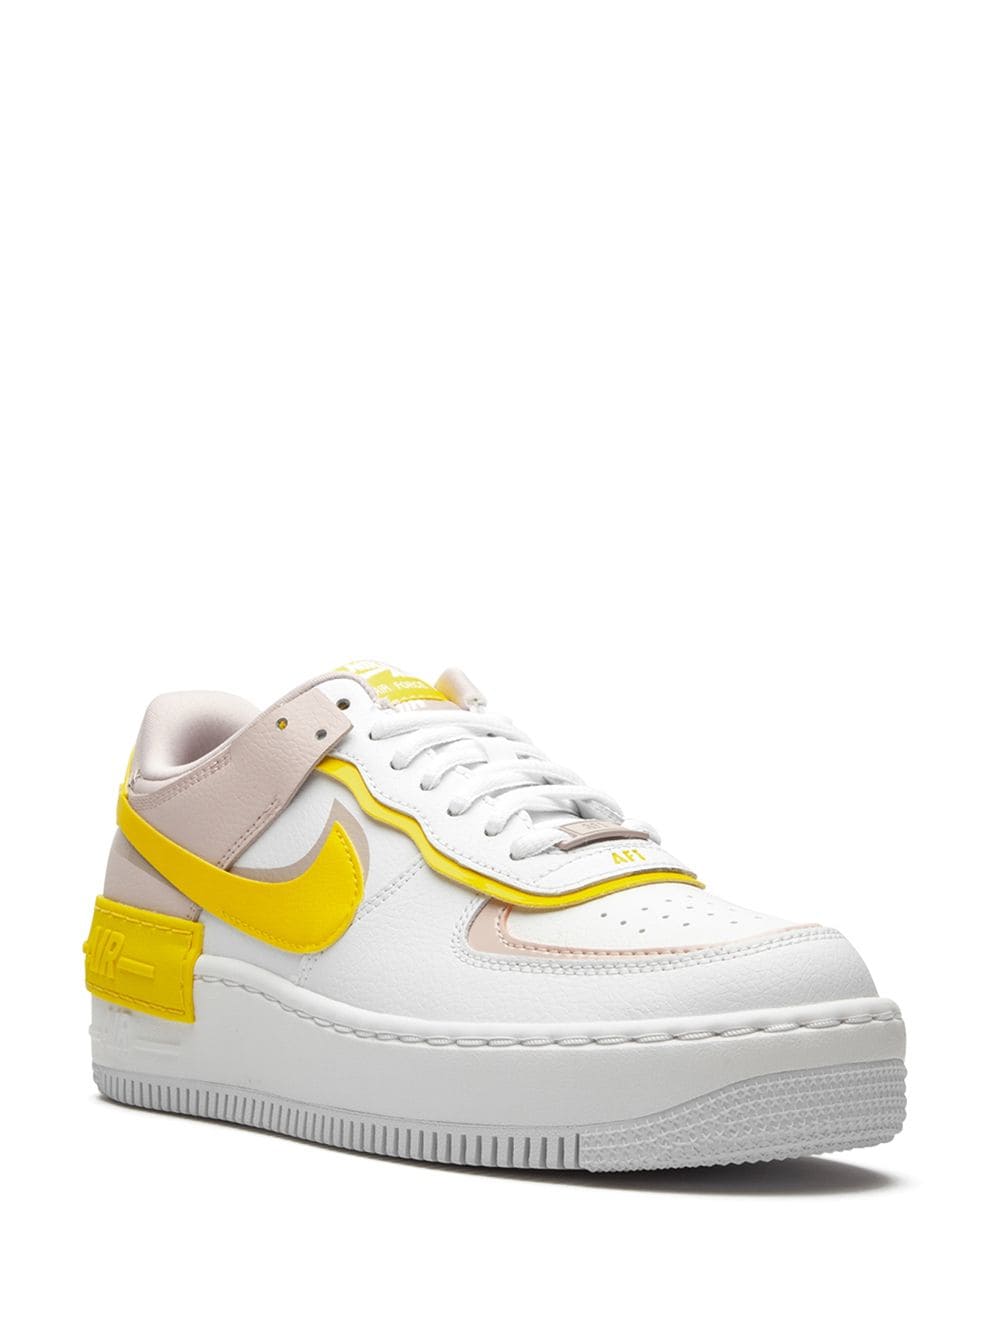 Image 2 of Nike Air Force 1 Shadow "Sunshine" sneakers